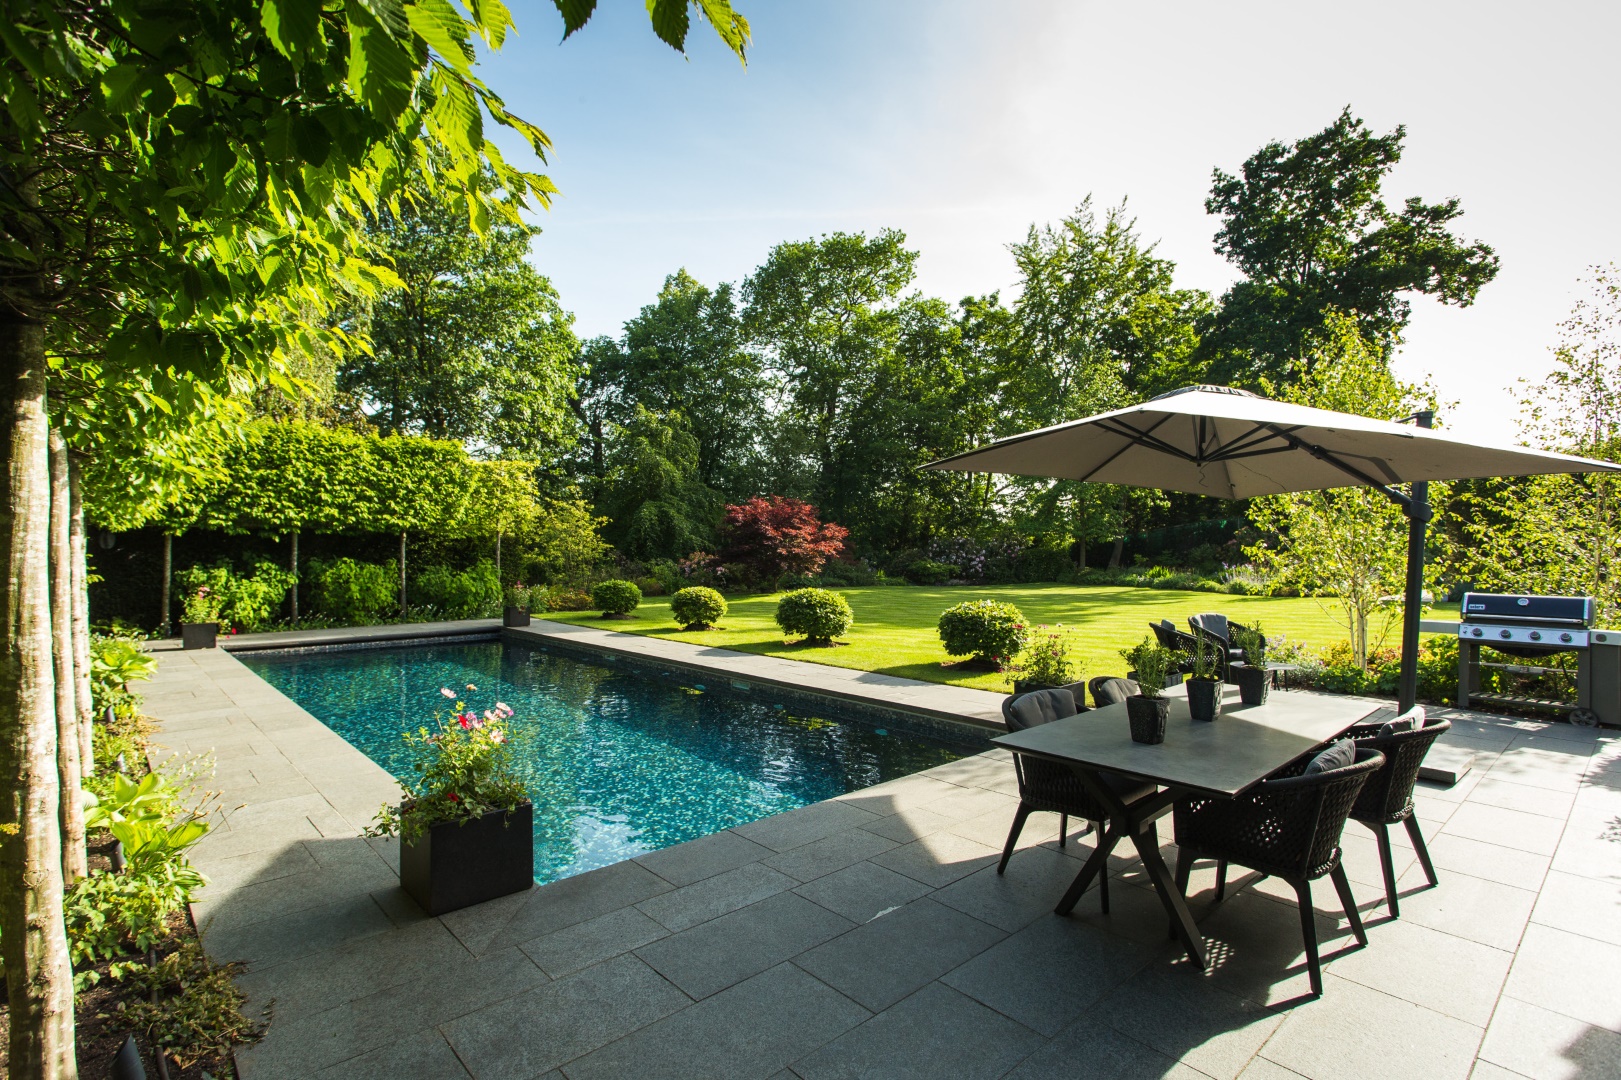 18 Transitional Landscape Designs for a Classic-Modern Look in Your Yard